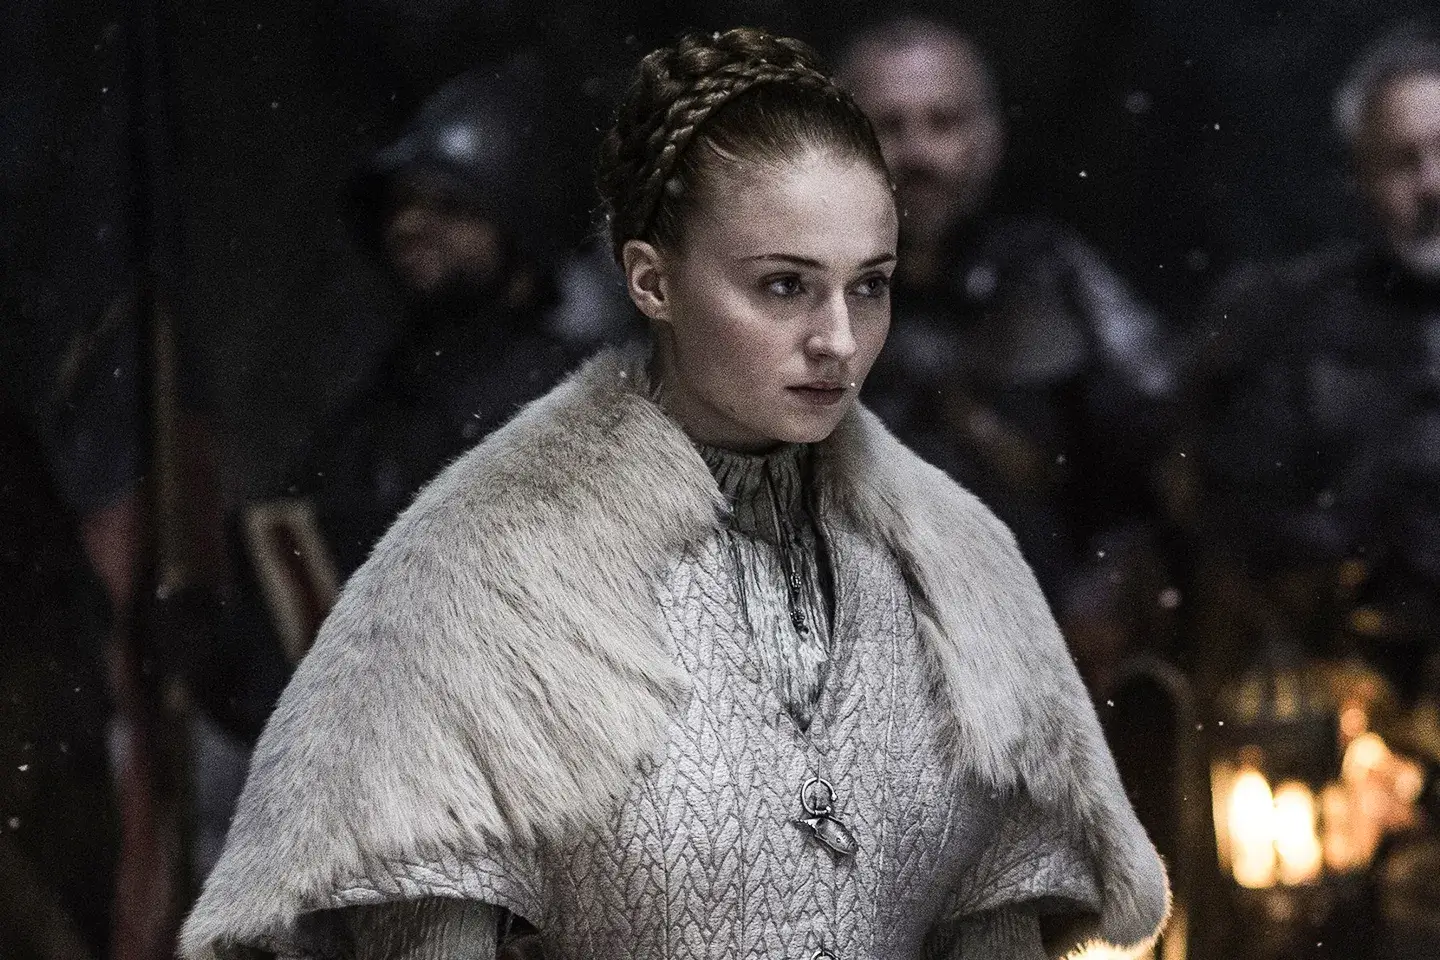 One Game of Thrones scene involving Sophie Turner's Sansa Stark received widespread criticism from fans